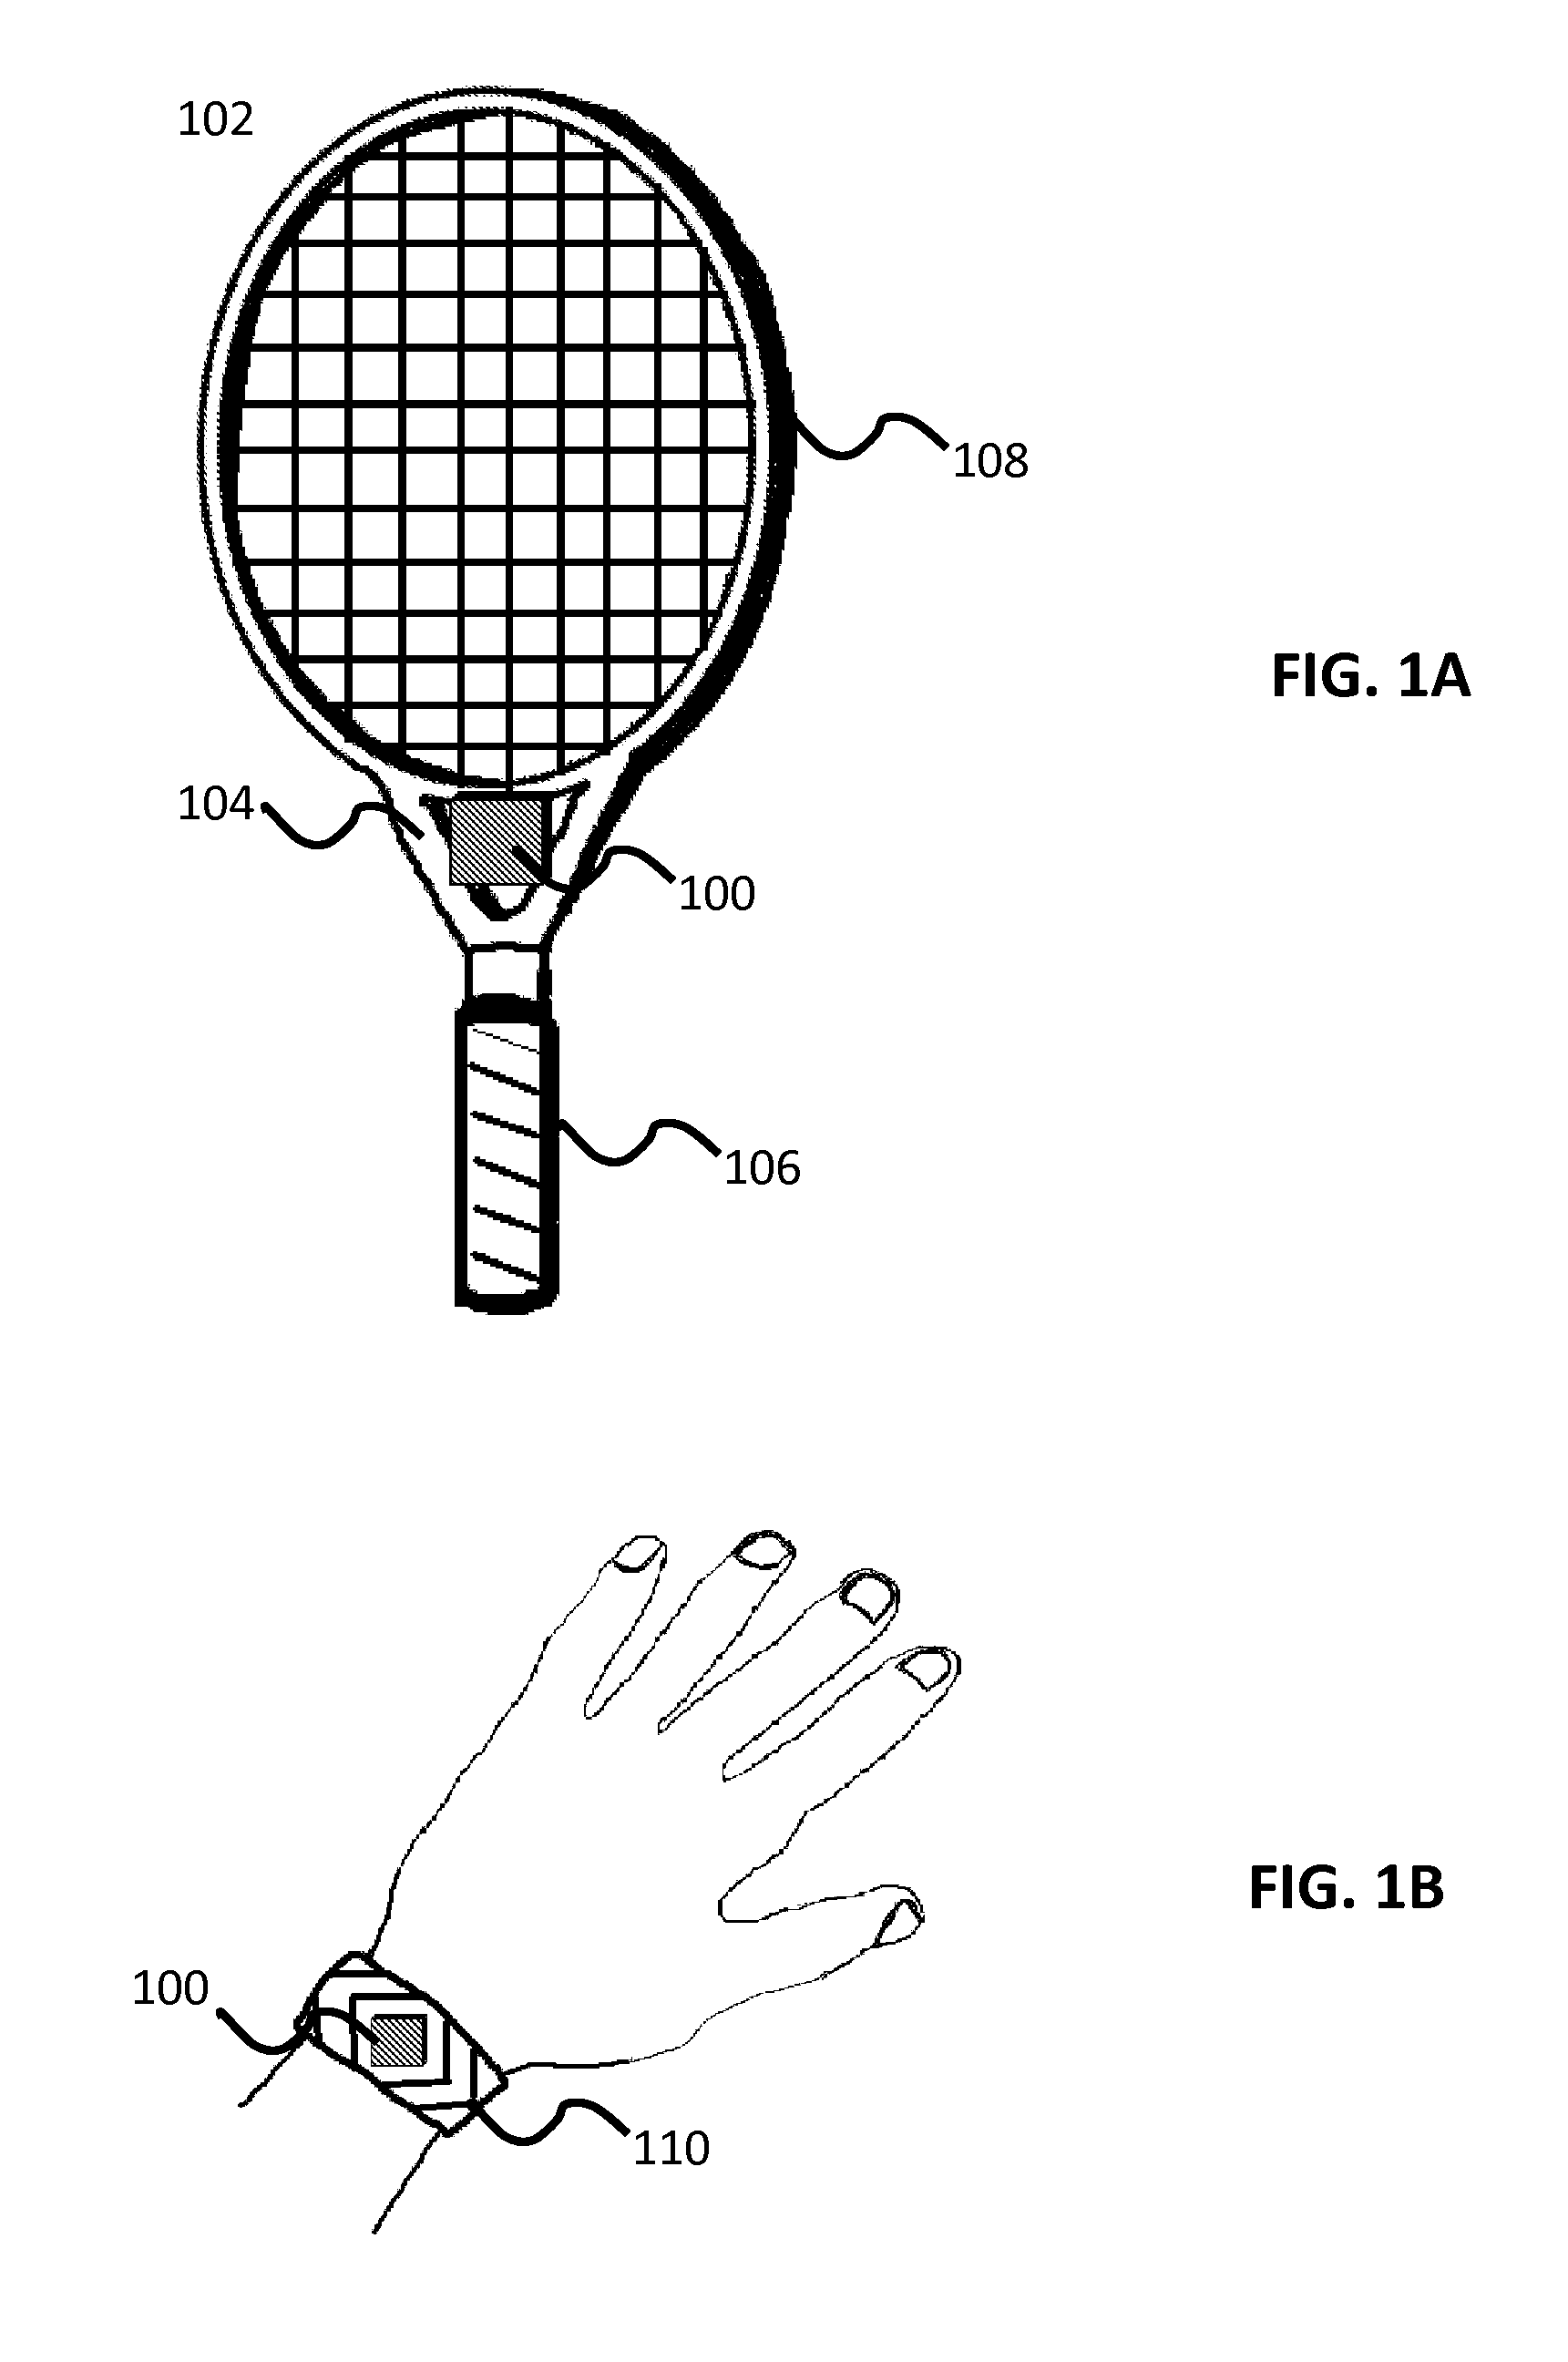 Tennis Racket Sensor System and Coaching Device